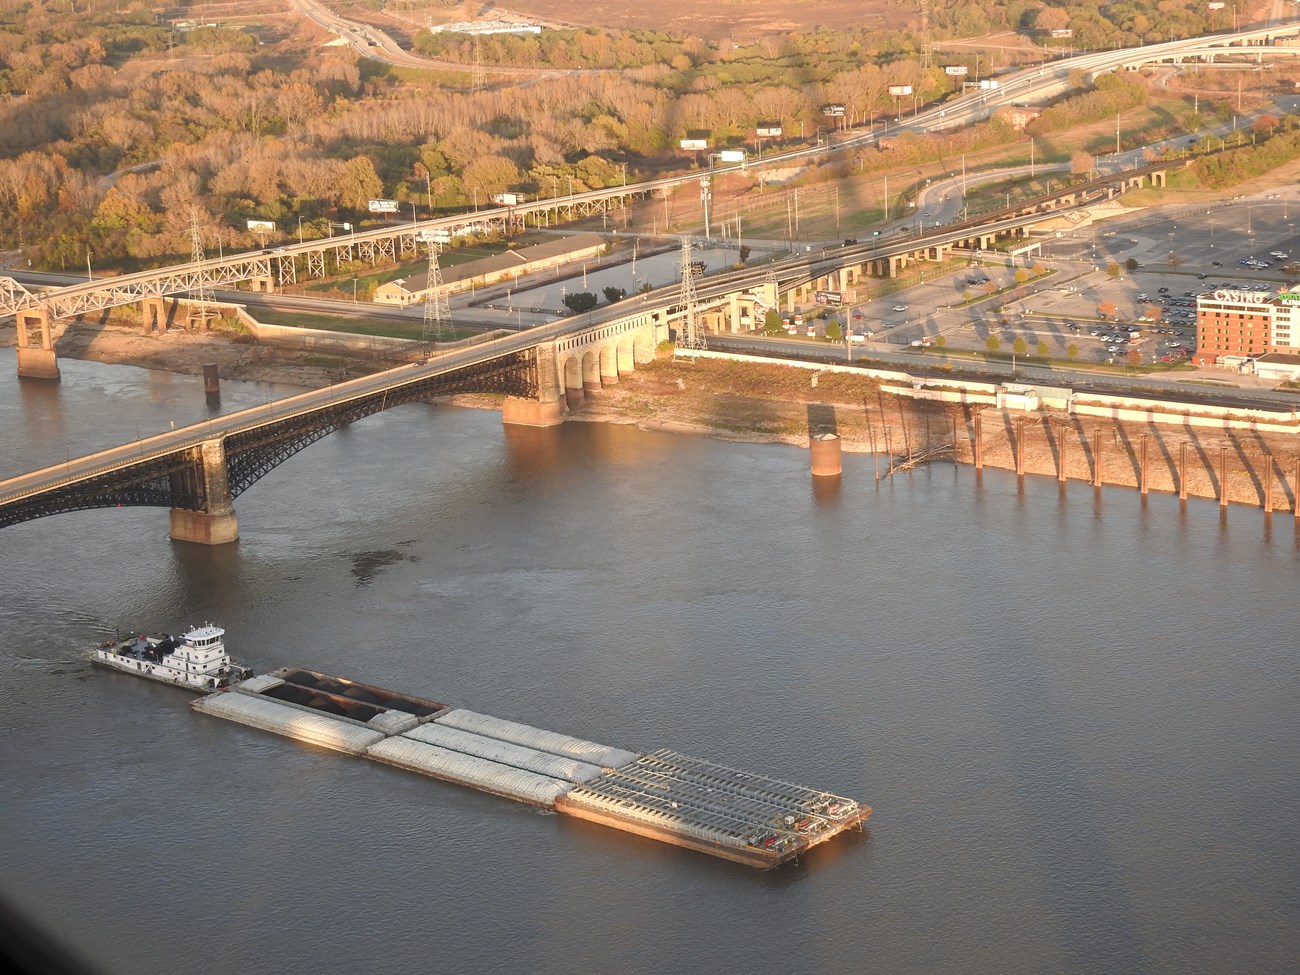 A towboat pushing several barge cars passes under a bridge. A shadow of an arch is on the opposite riverbank.